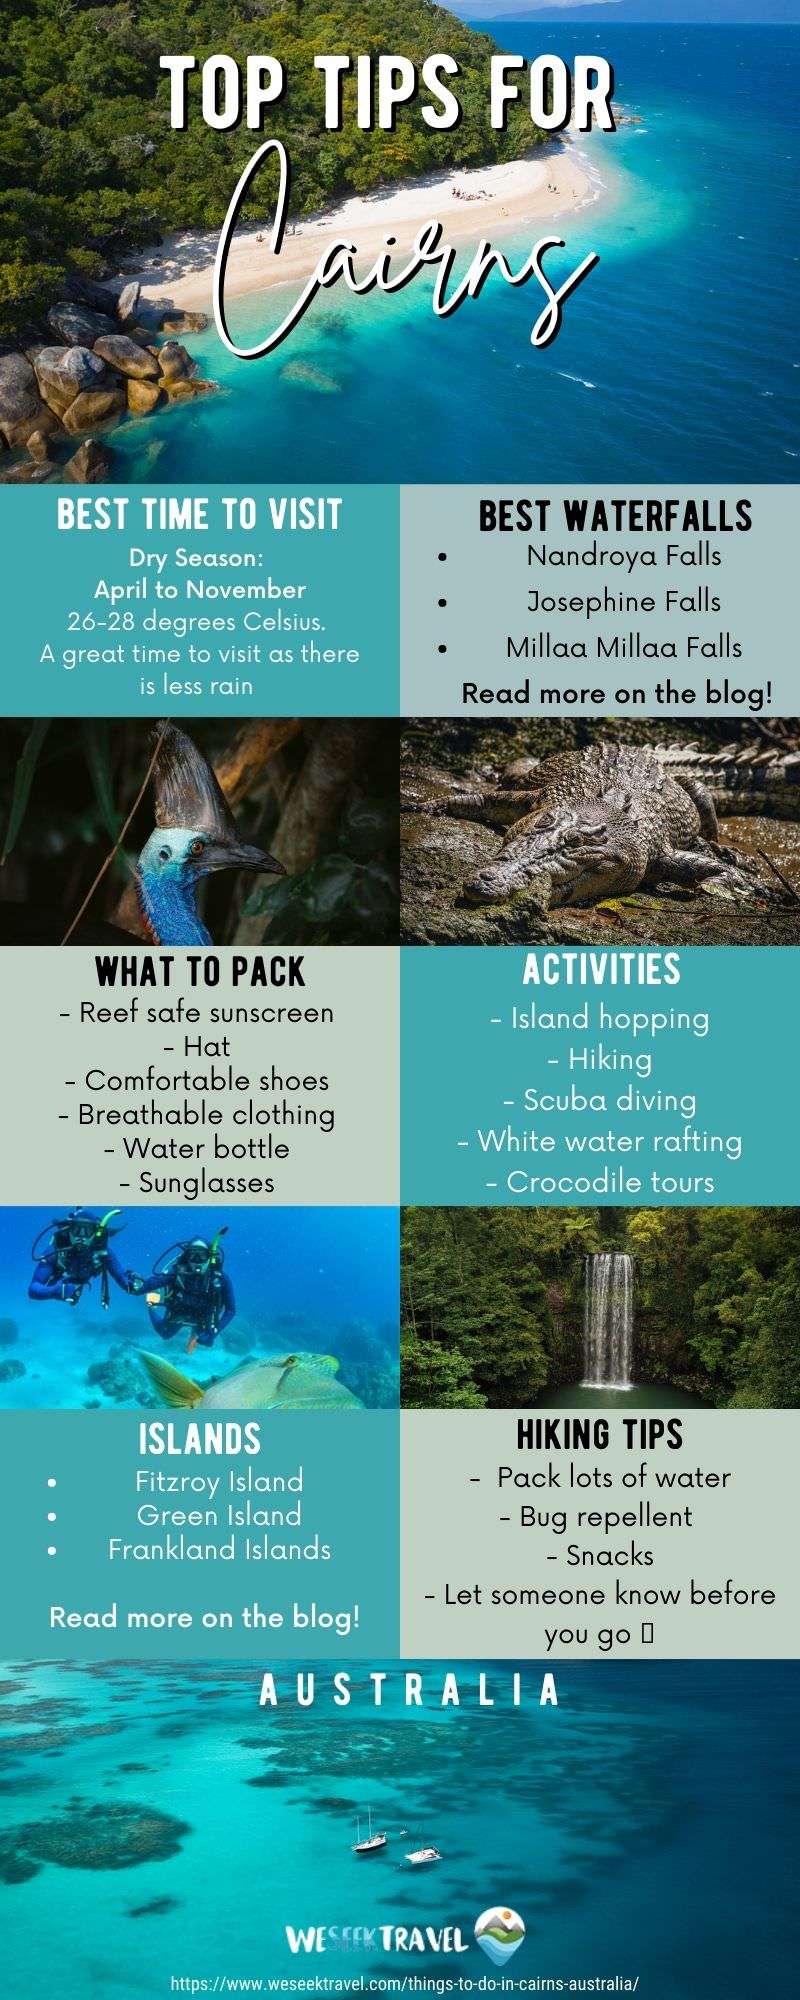 Cairns travel tips infographic